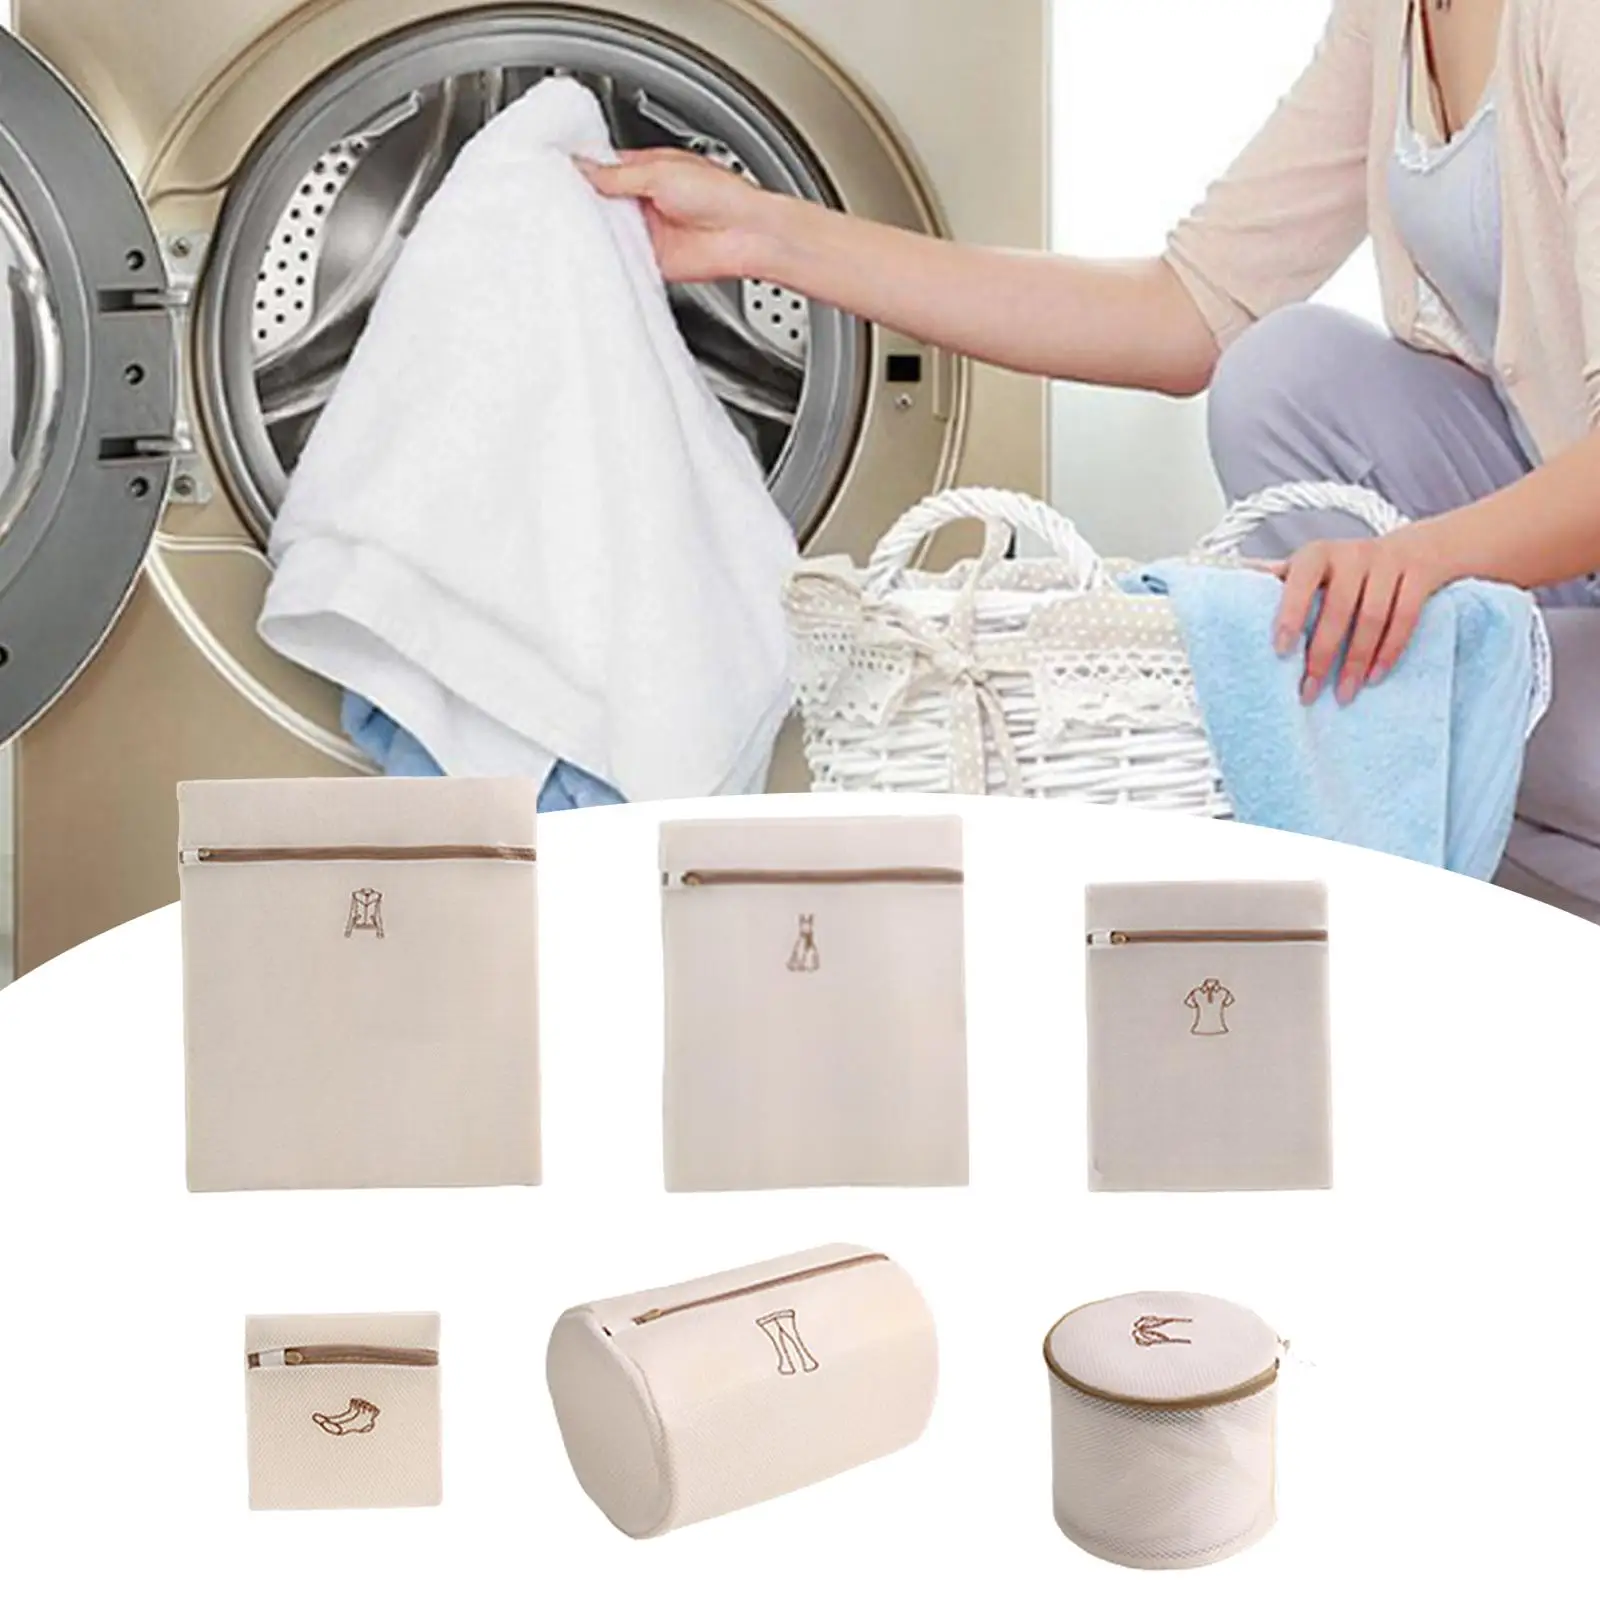 Mesh Laundry Bags with Premium Zipper Travel Laundry Storage Durable Washing Machine Mesh Bags for Pants Bra Dress Tops Trousers